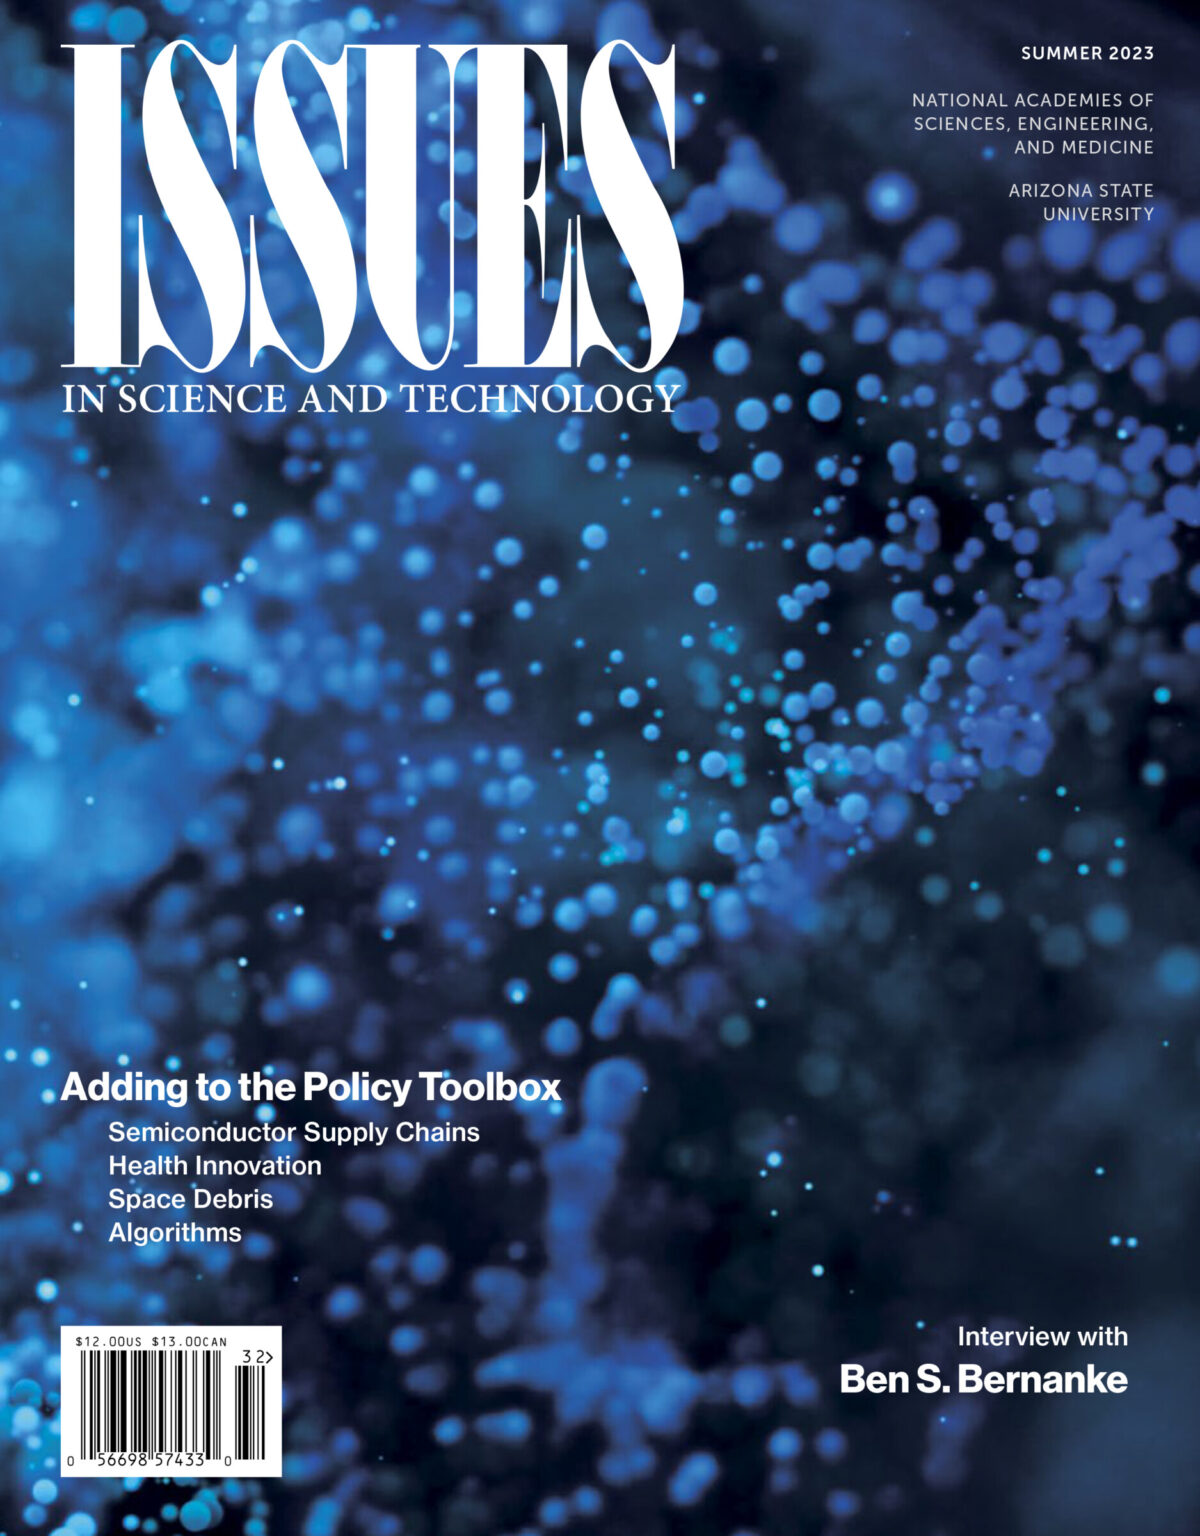 Cover of the Summer 2023 ISSUES IN SCIENCE AND TECHNOLOGY